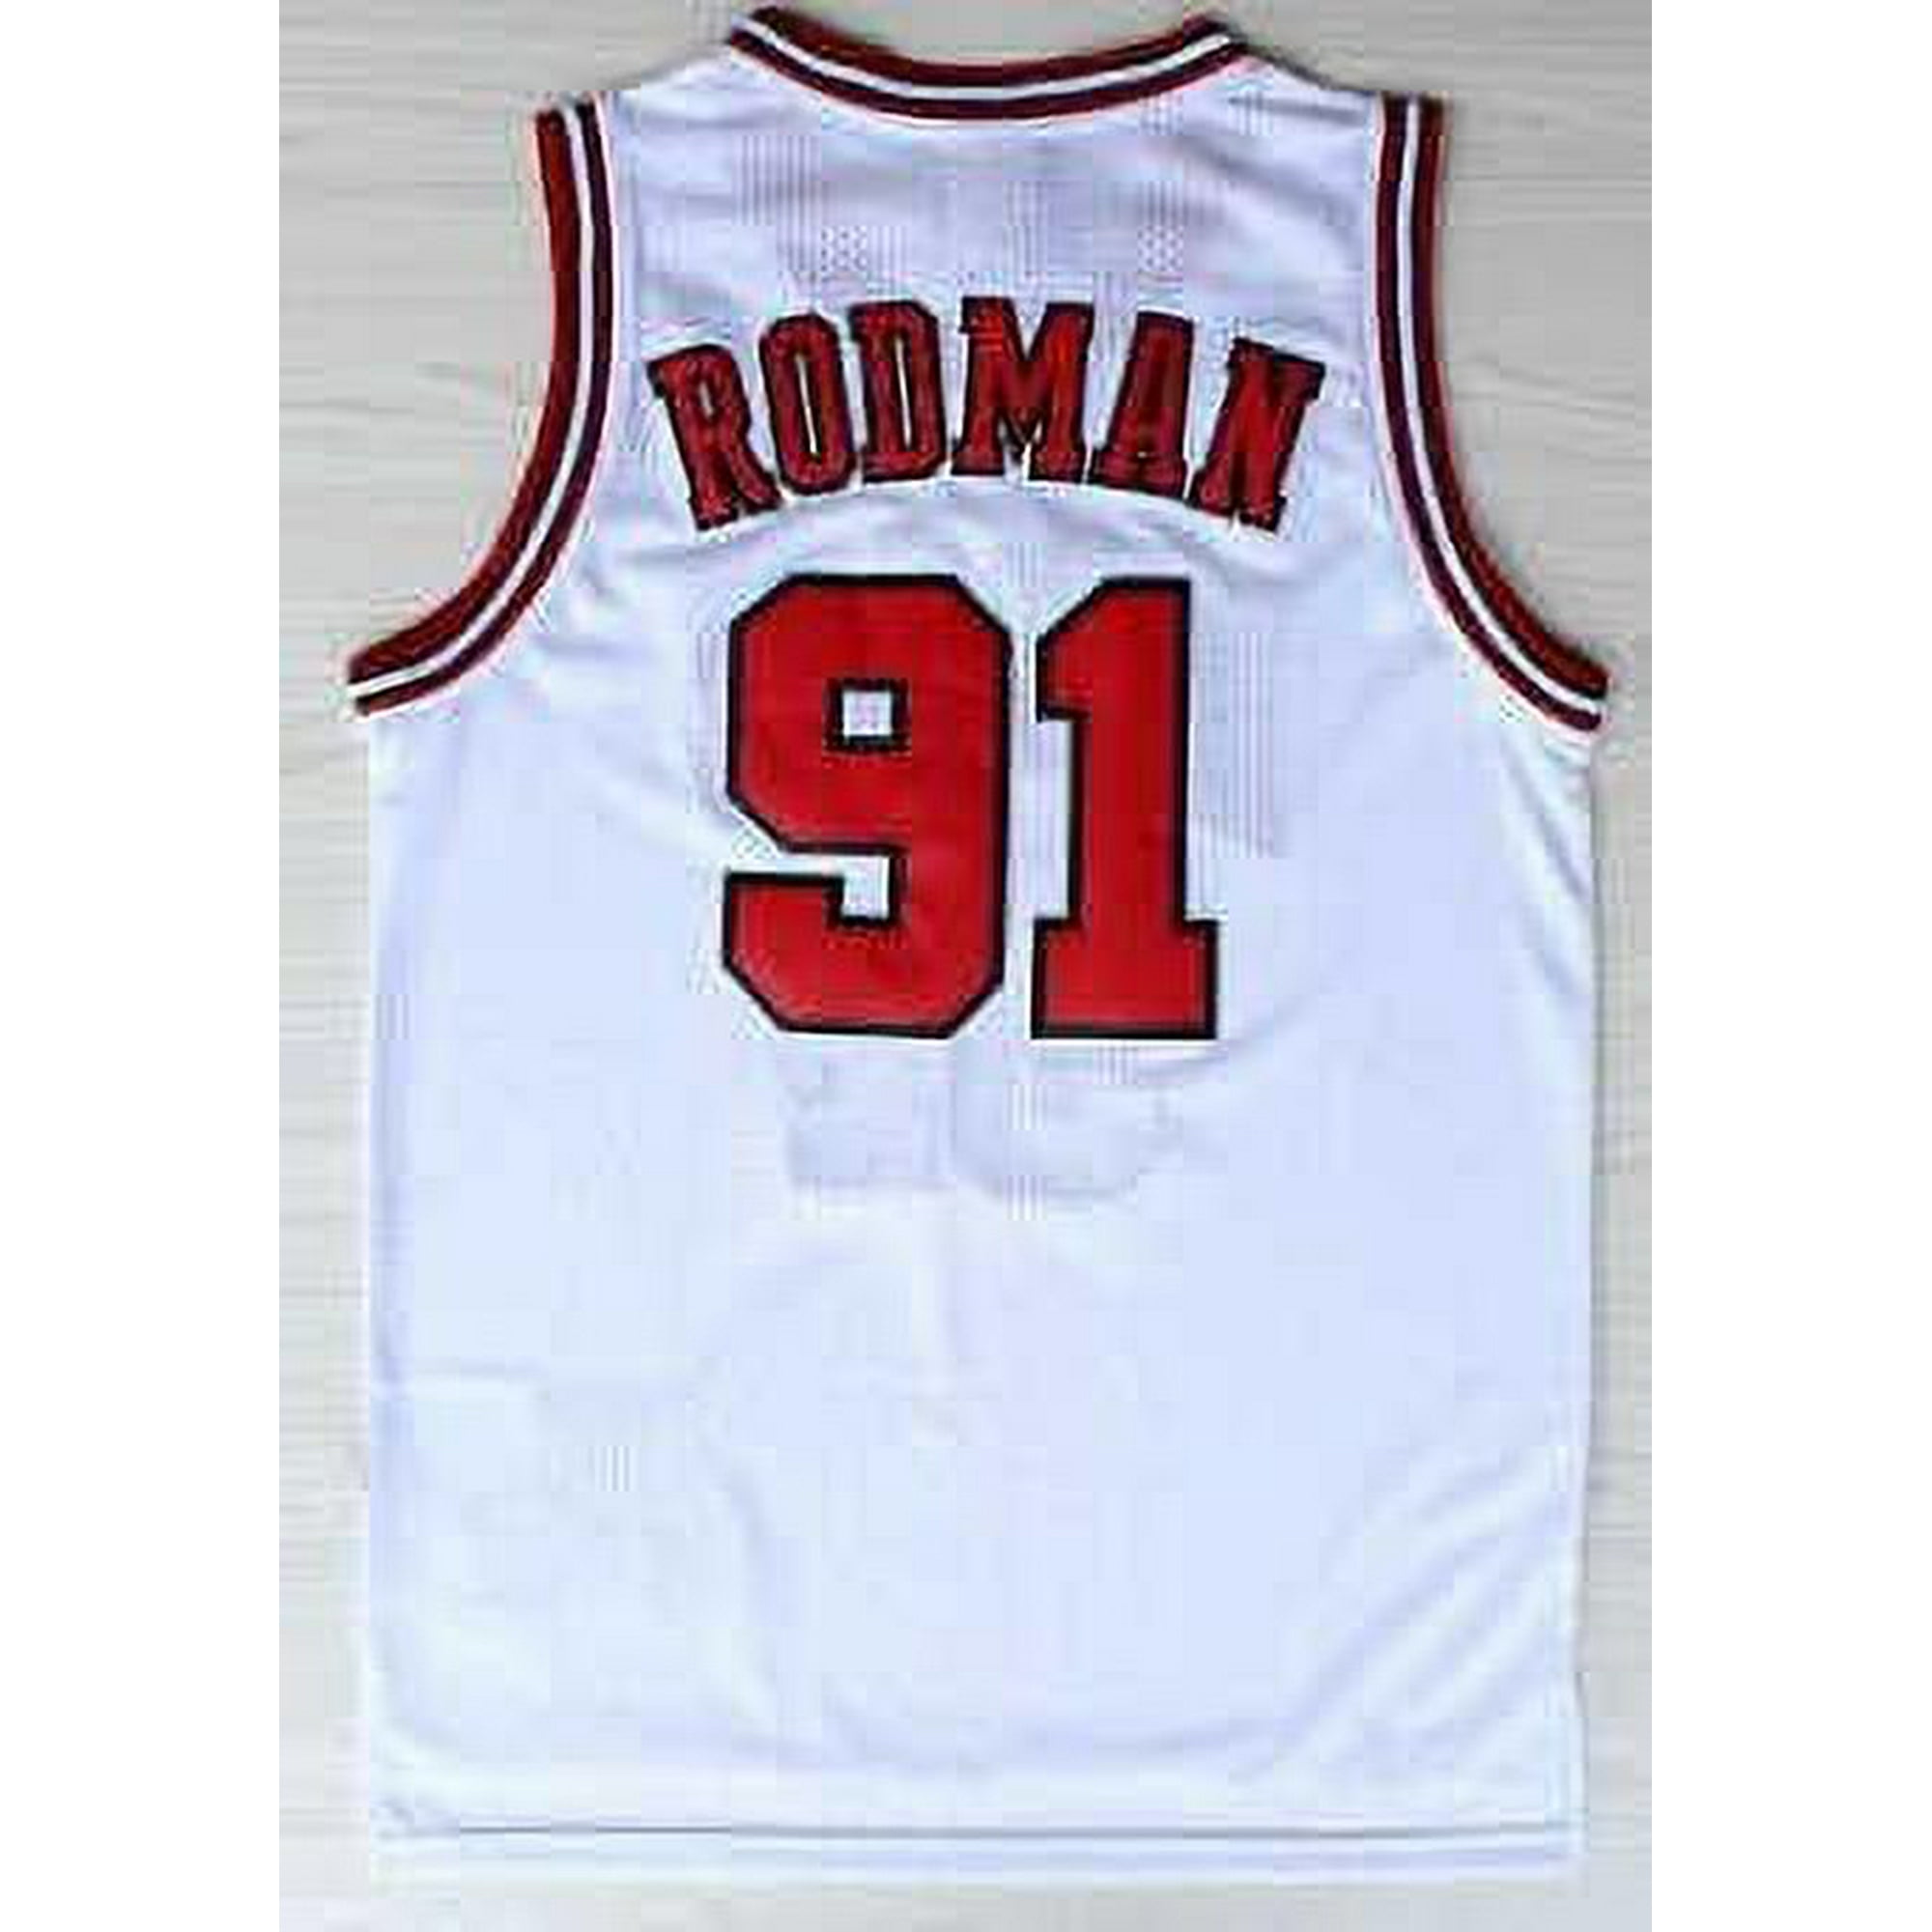 Mens New American Basketball Jerseys Clothes #33 Scottie Pippen